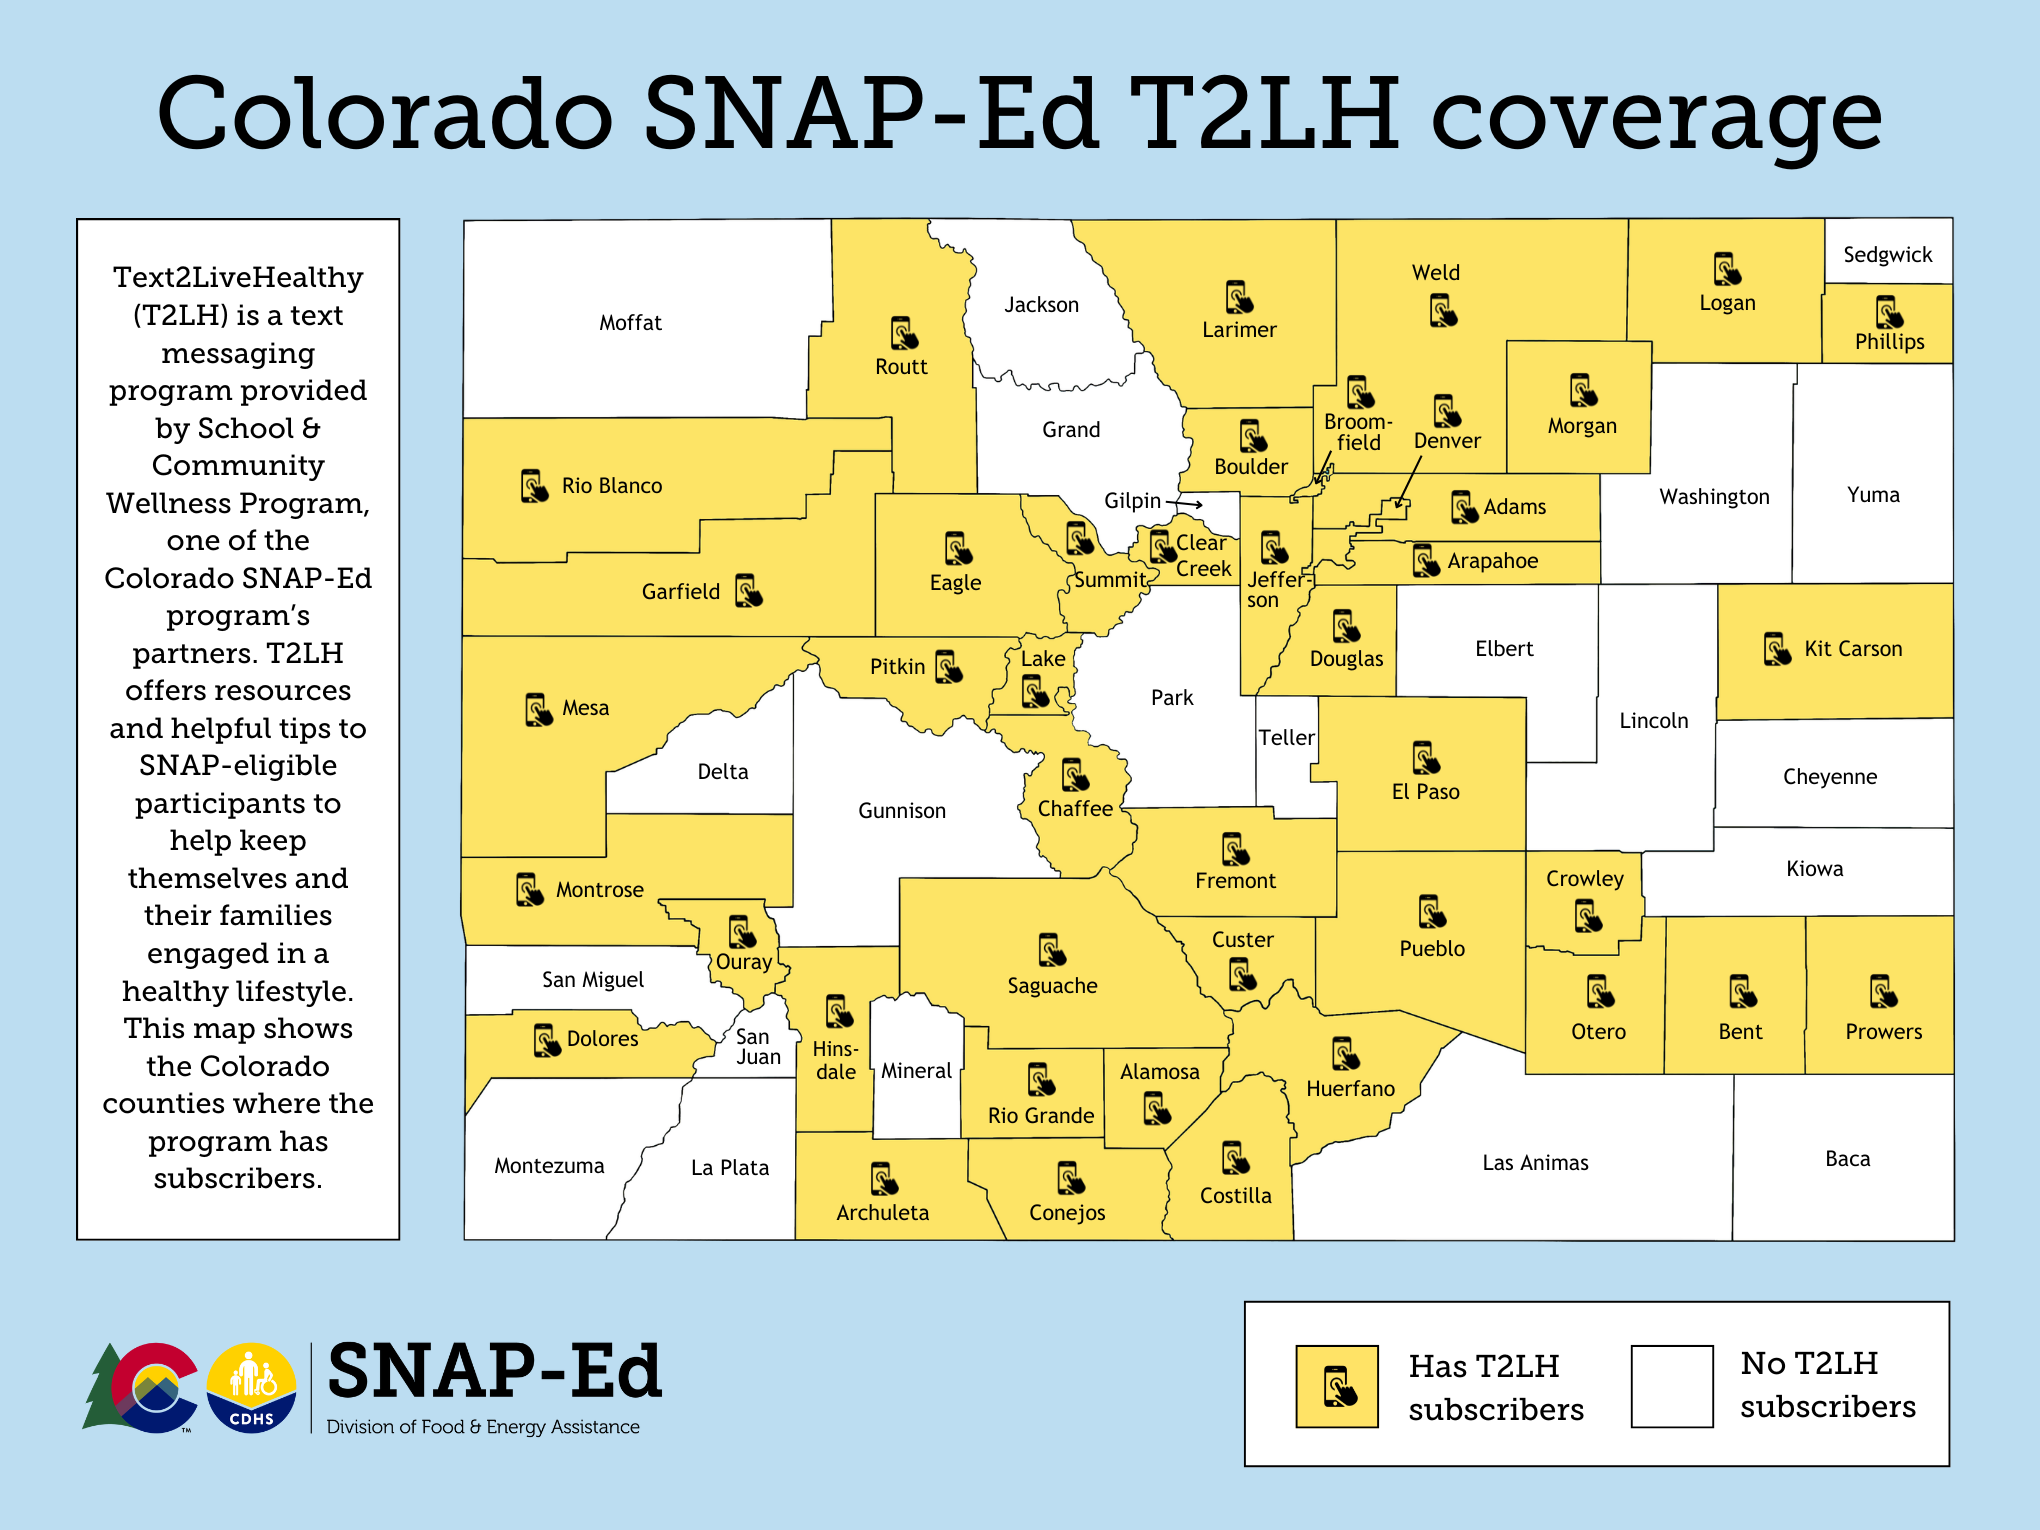 Colorado SNAP-Ed T2LH coverage map